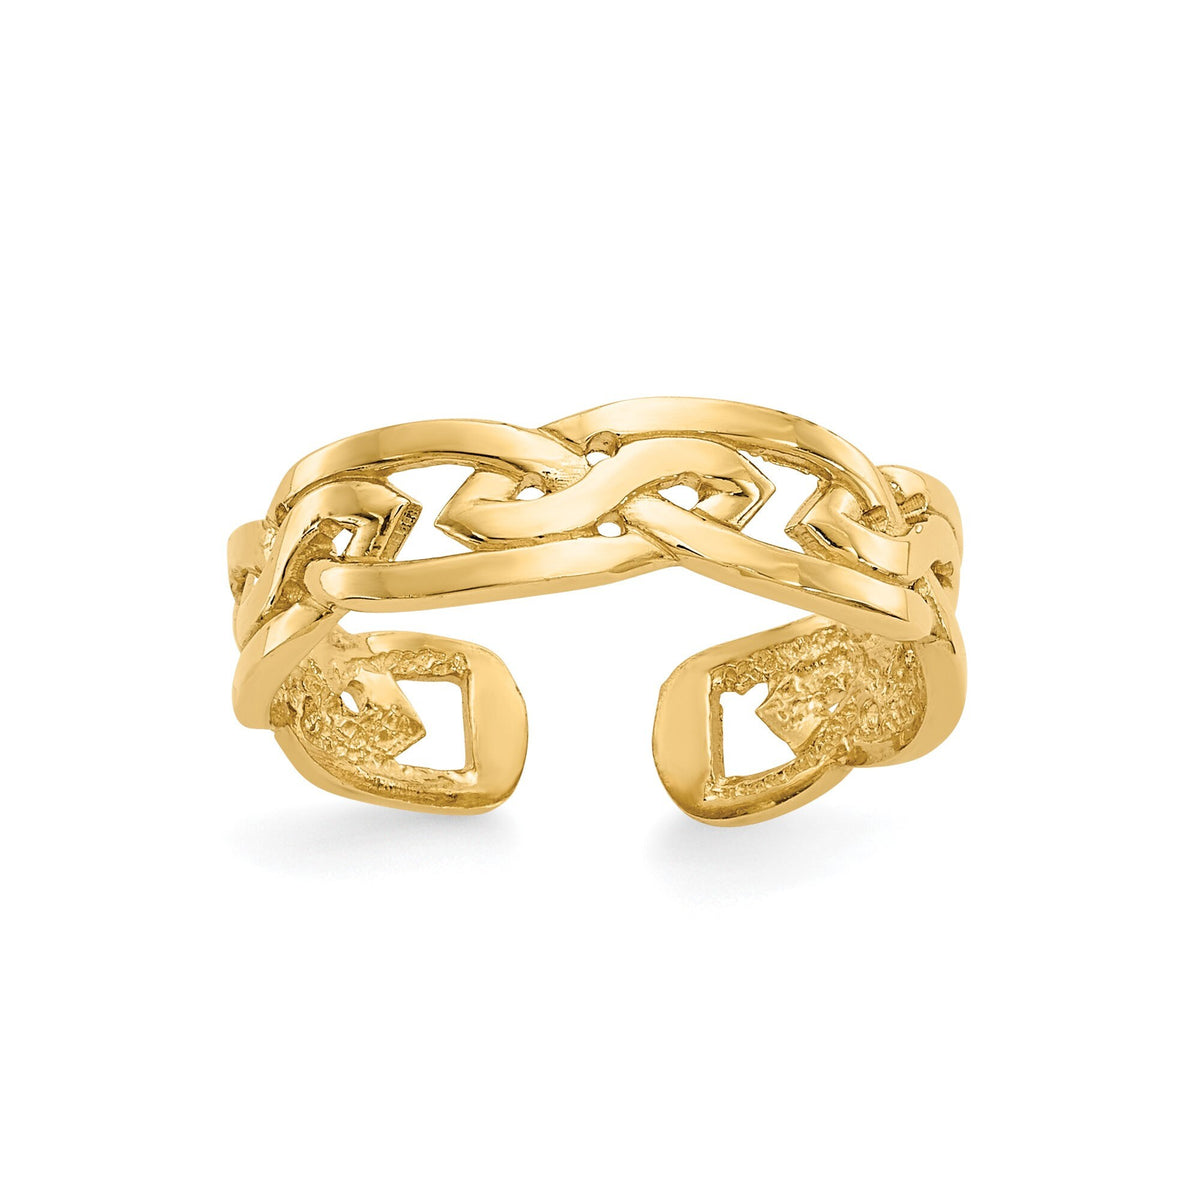 14k Yellow Gold Weave Toe Ring 4mm Band  - Gift Box Included - Made in U.S.A. - Solid 14k Gold (Not Plated or Filled)